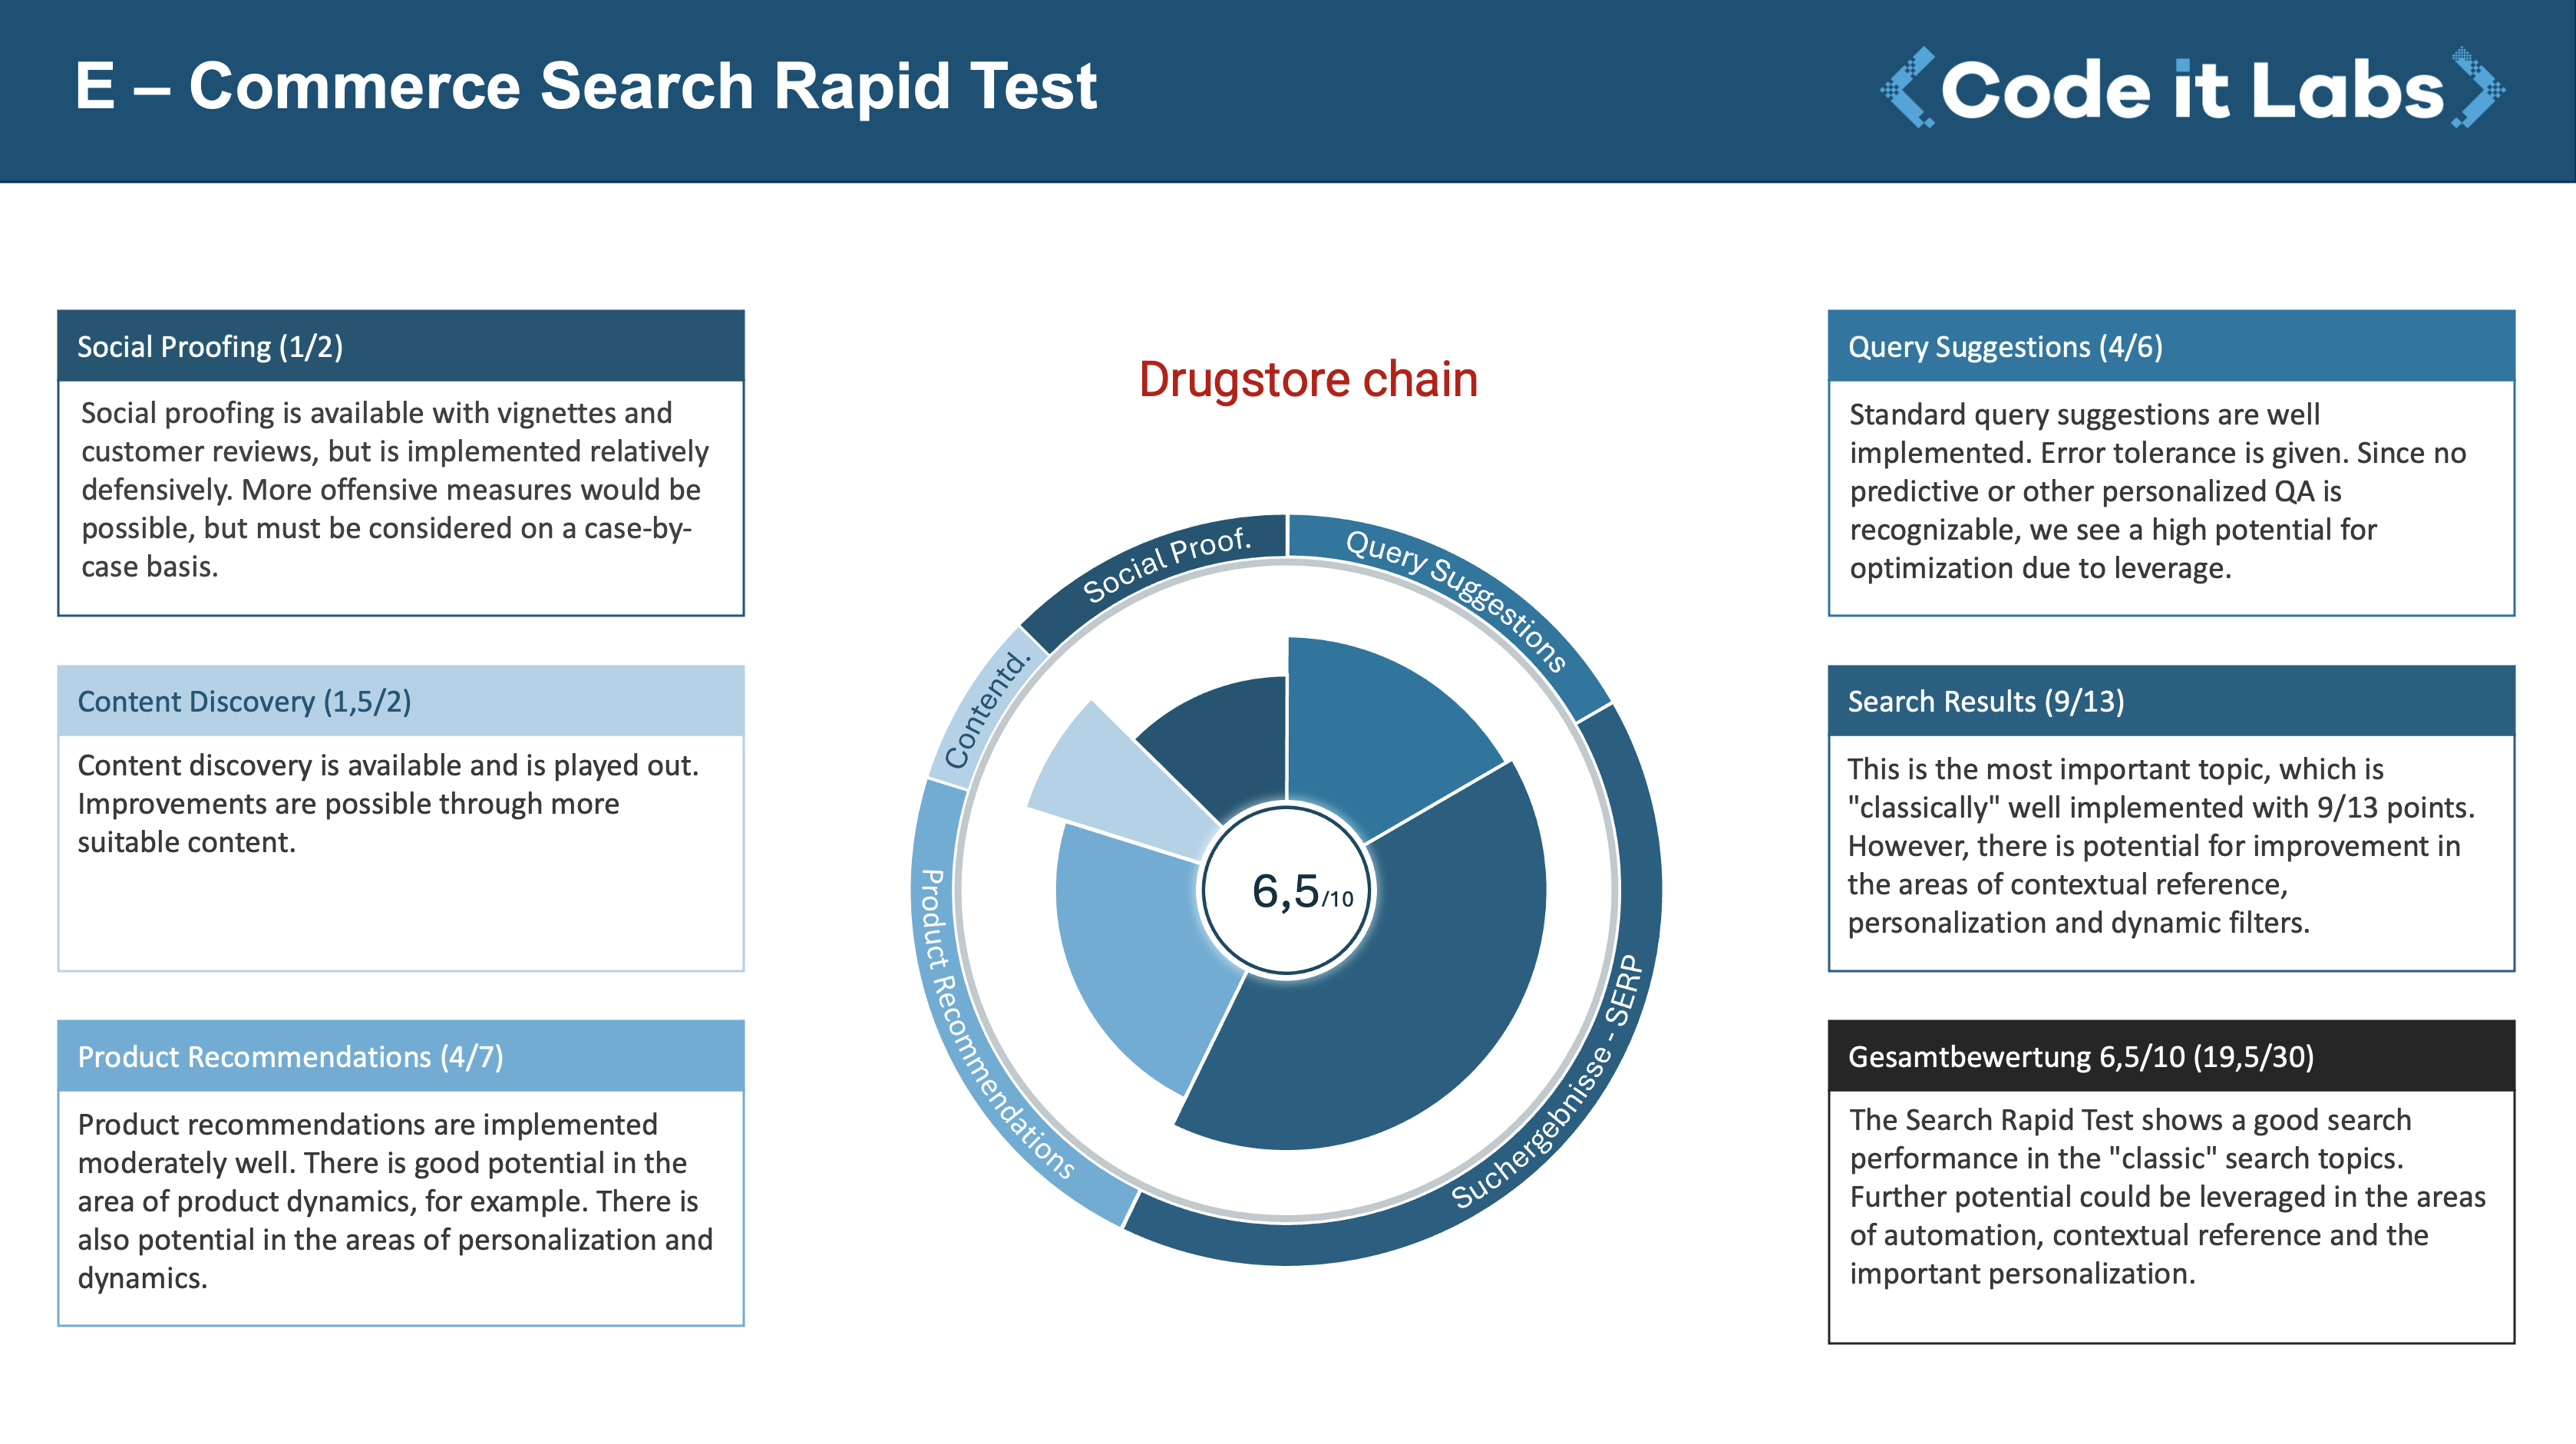 Business Sumerary from Search Rapid Test for a German drugstore chain